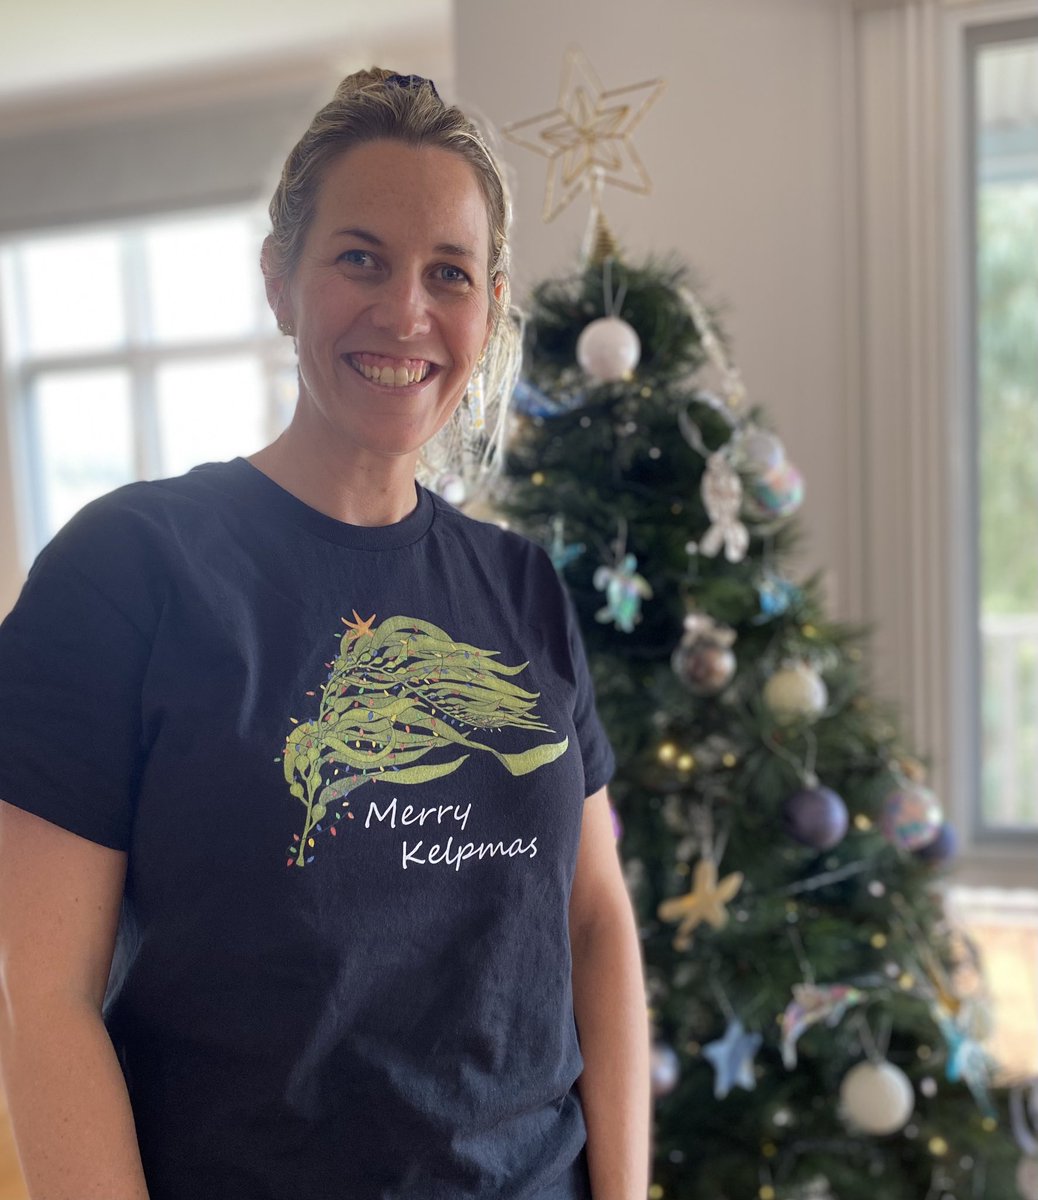 When your work colleagues send you “kelpmas” gifts, you know they are your people. Thank you @mary_a_young for the tee! Merry kelpmas to you all on this 1st December #phycologyfriday!